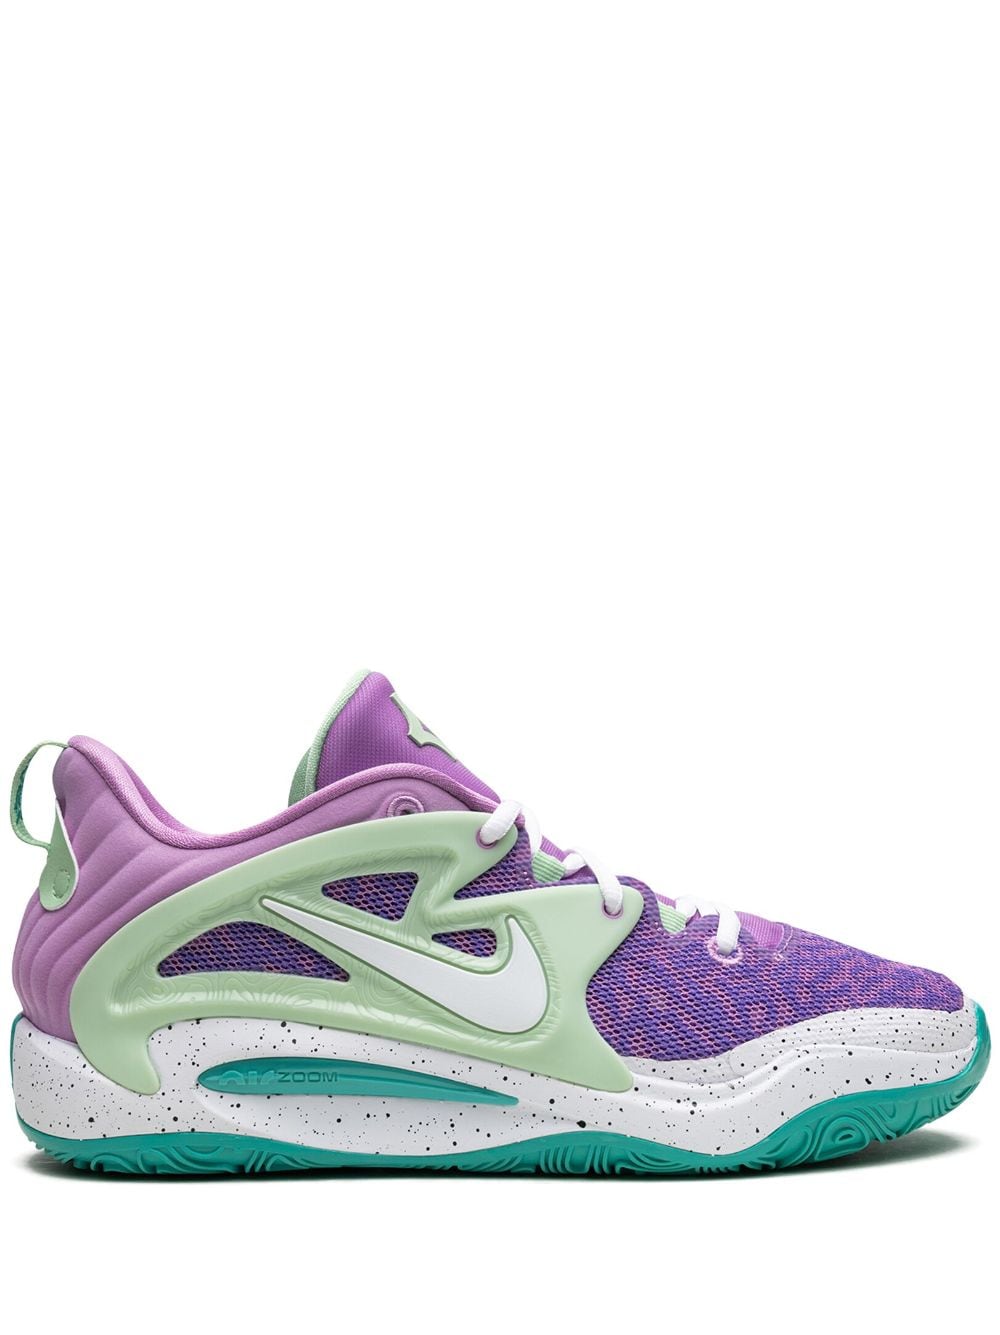 Nike Kd 15 Eybl Nationals Trainers In Purple